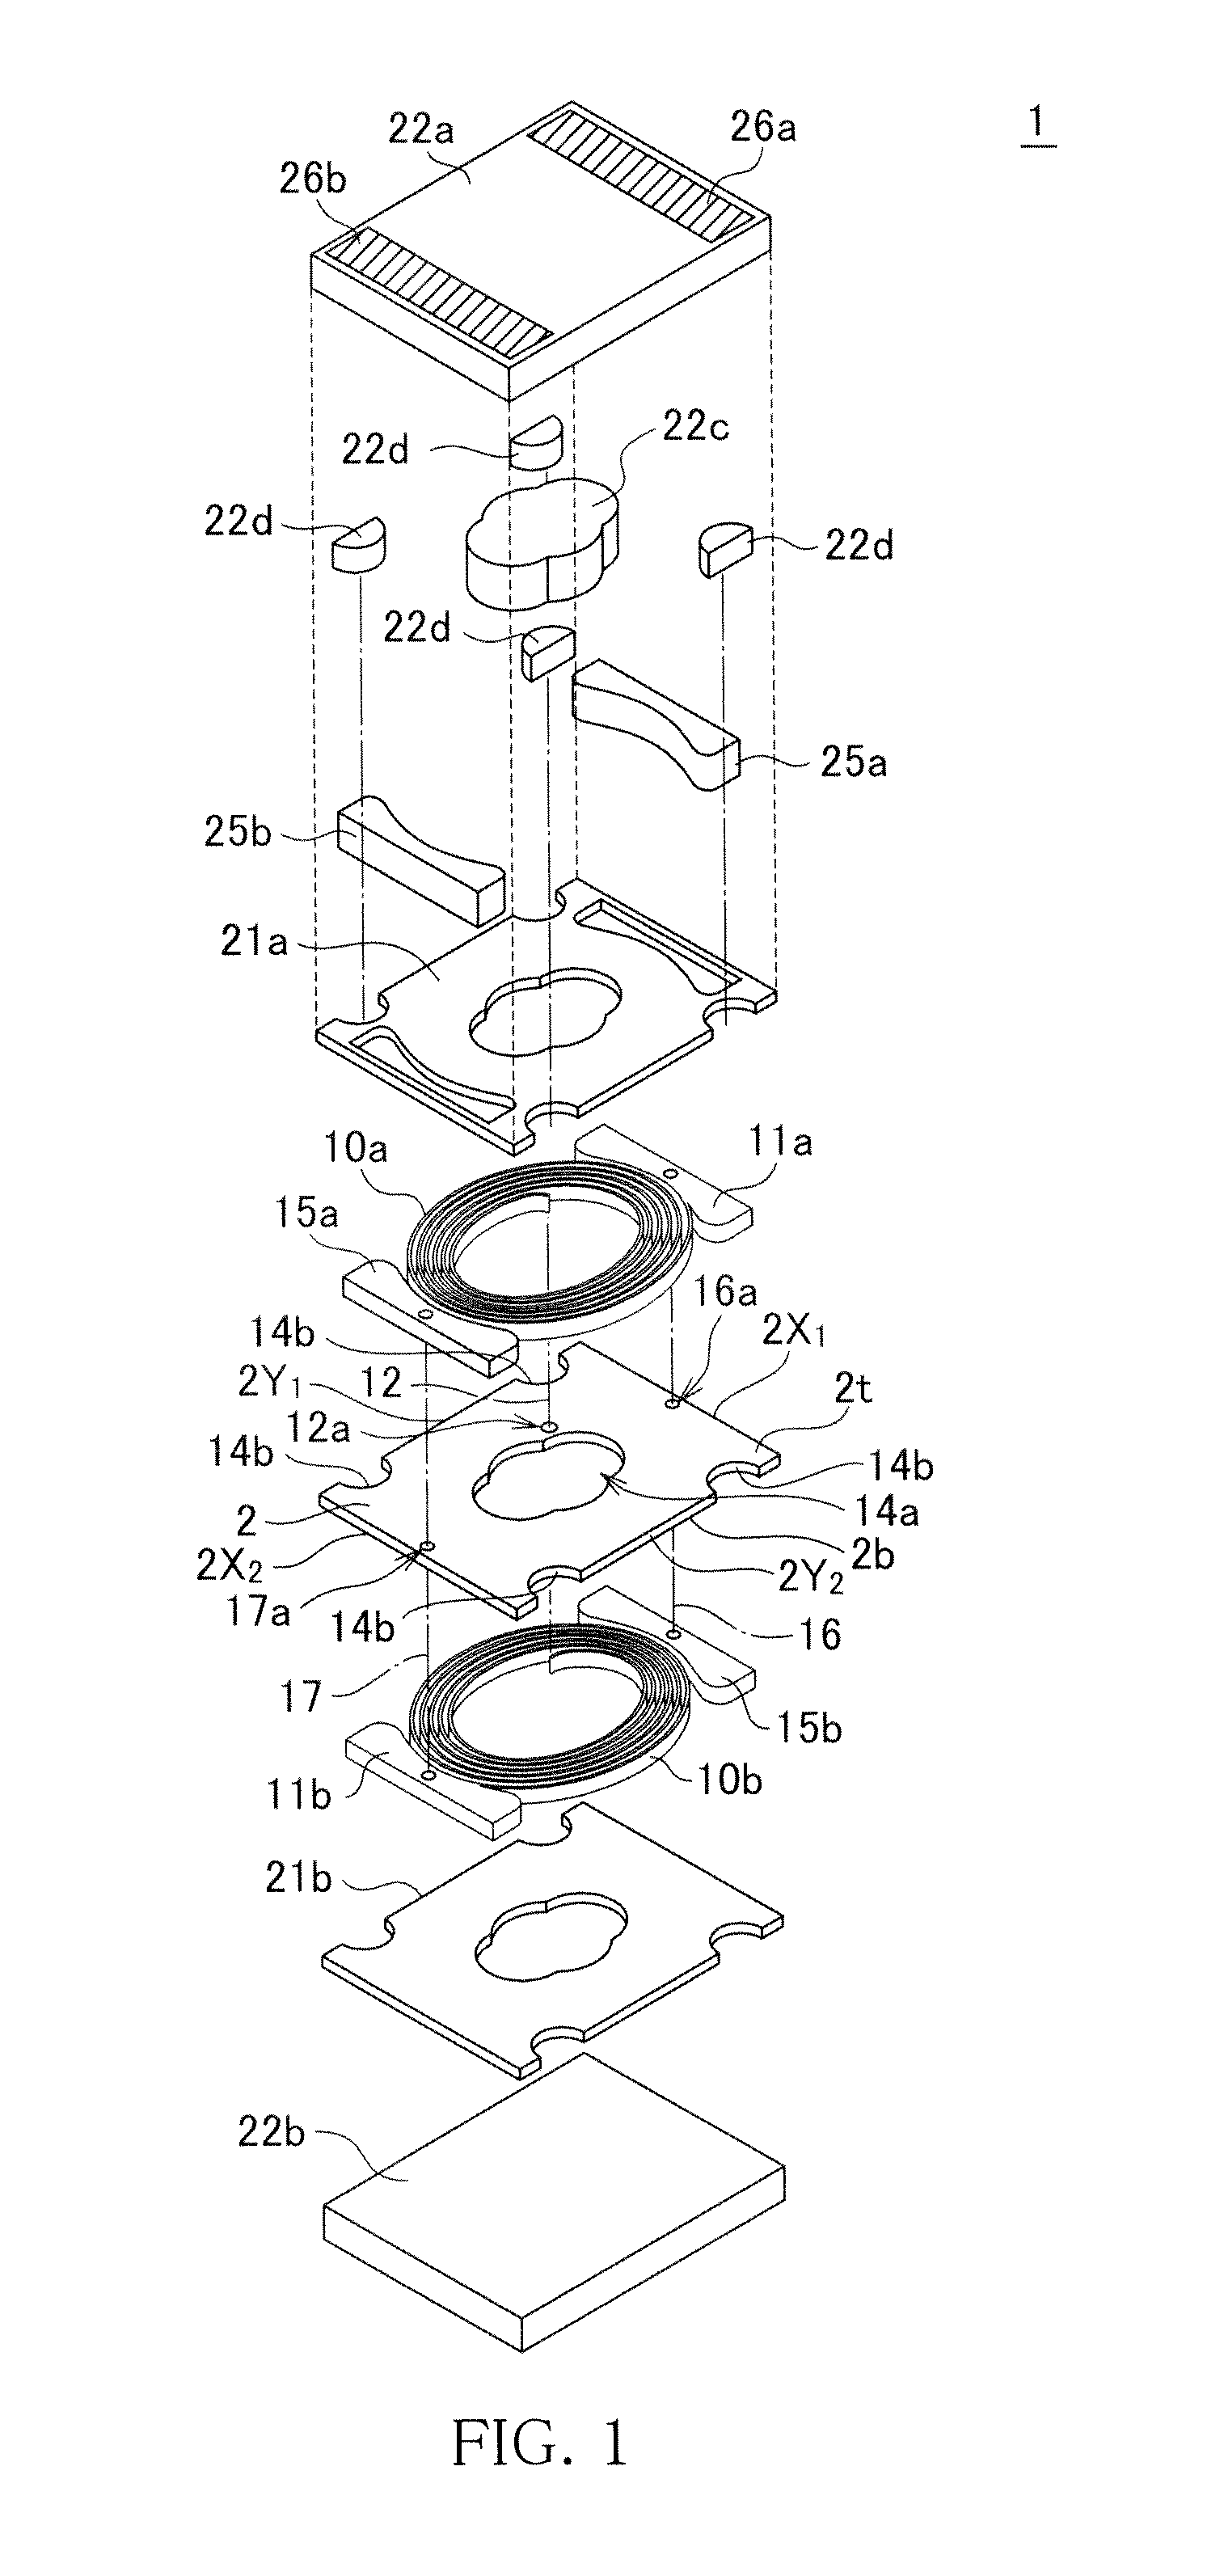 Coil component